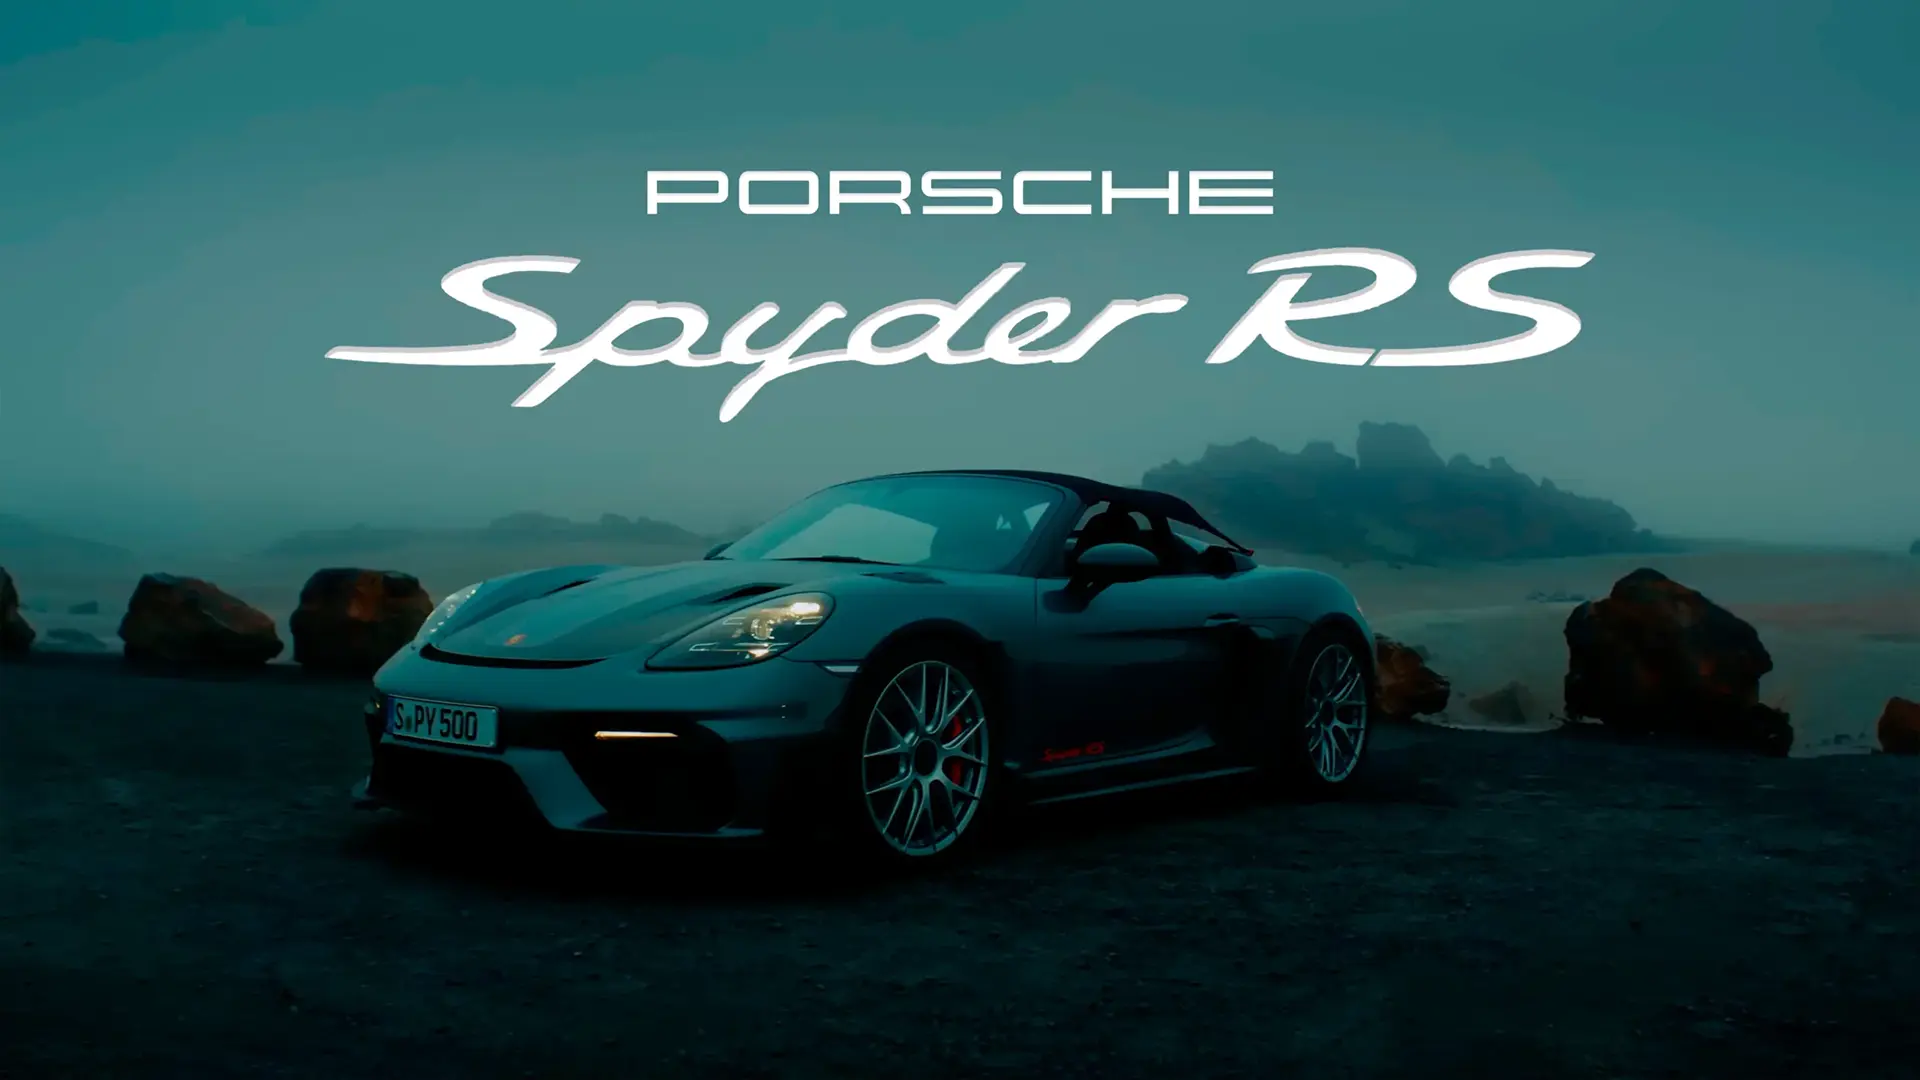 The new Porsche 718 Spyder RS: A rebel unleashed